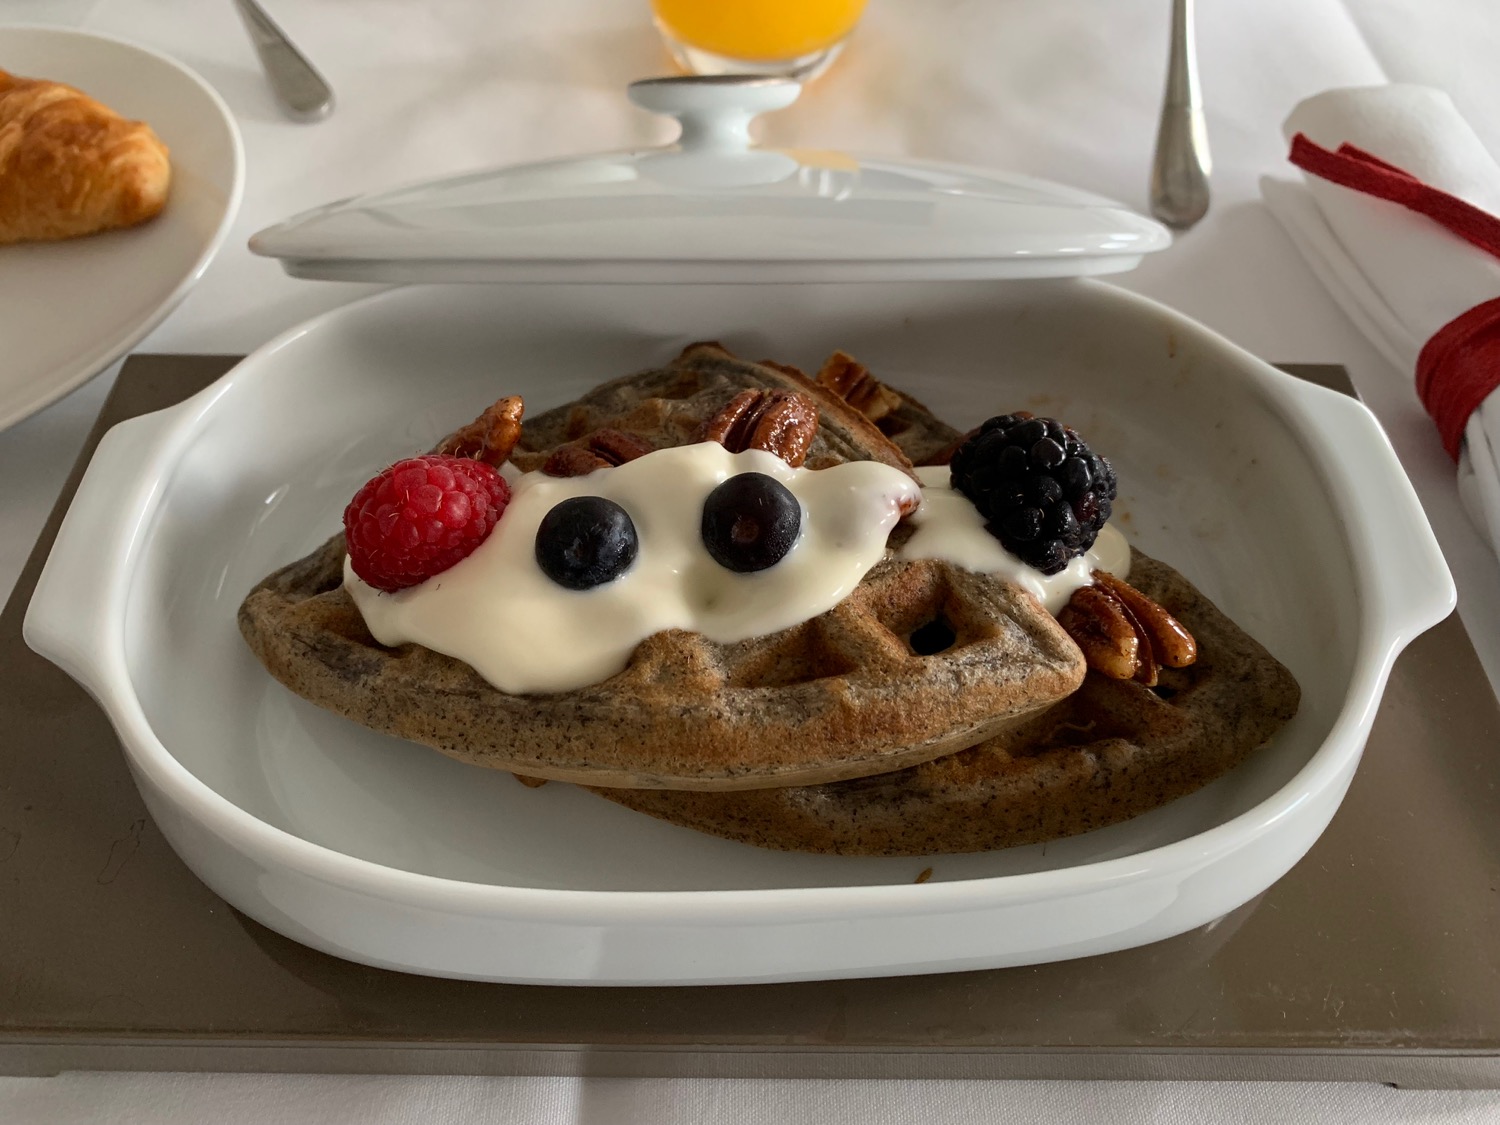 a plate of waffles with fruit and nuts